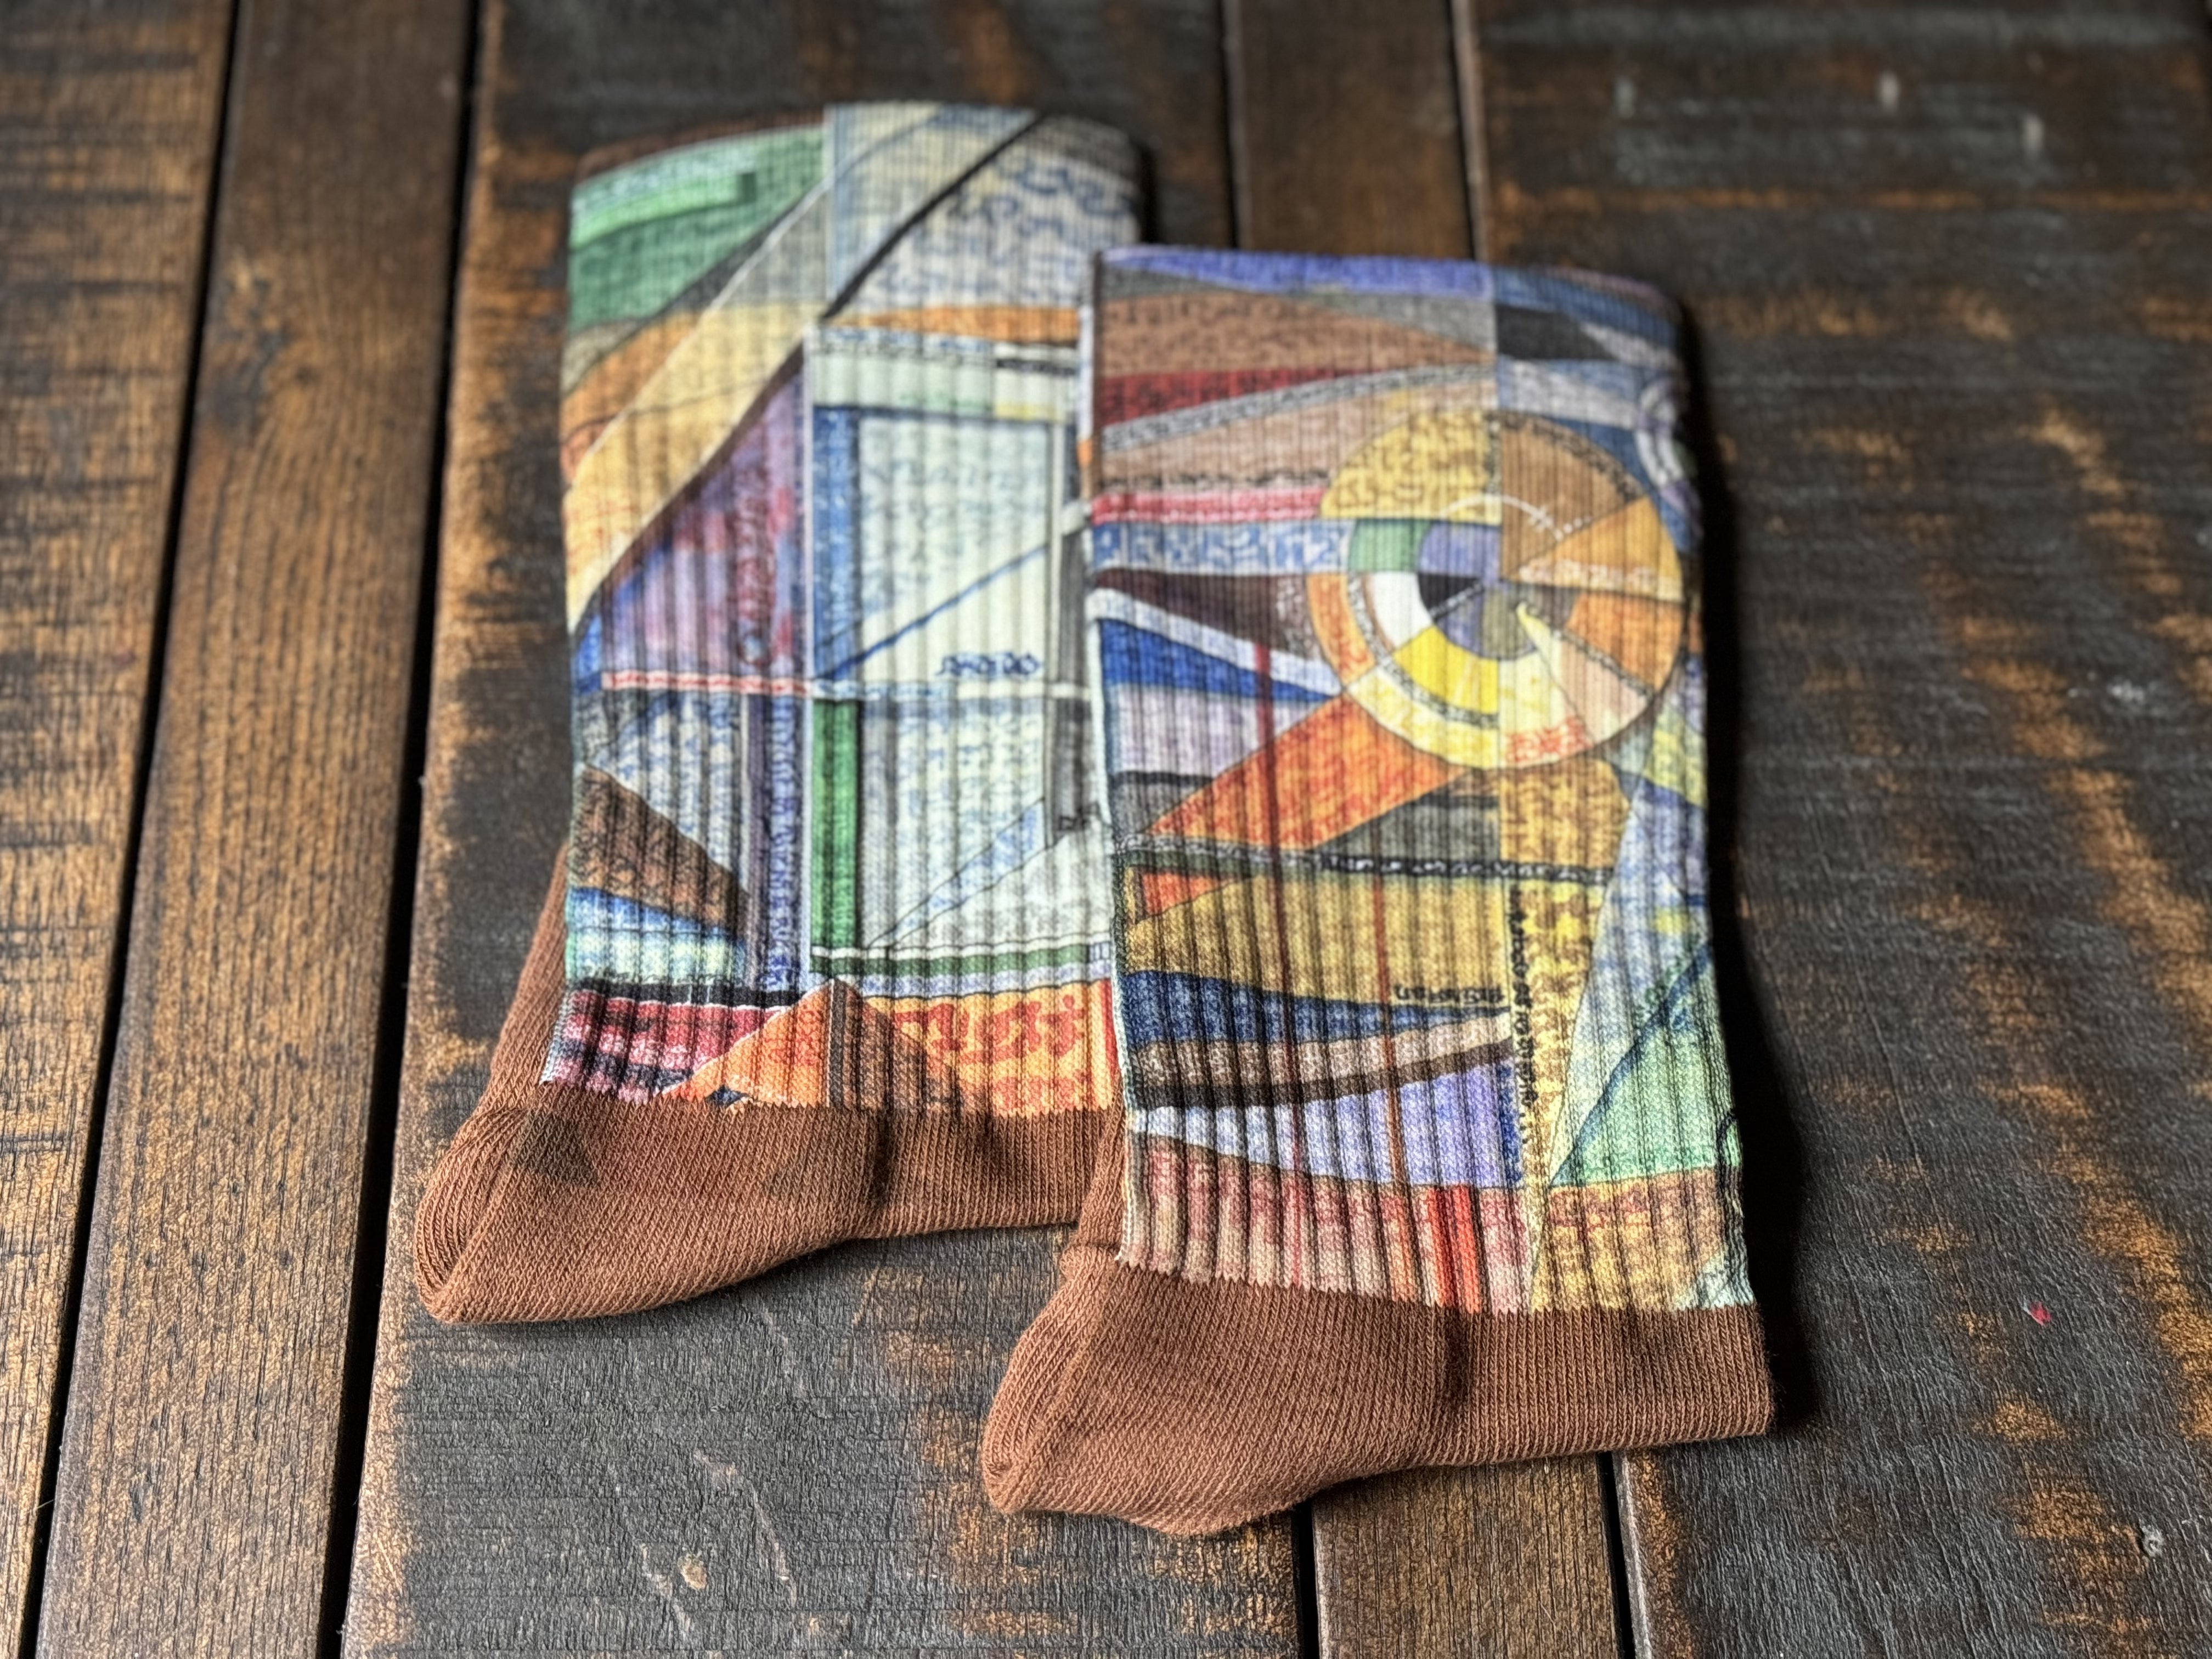 "Cost of Living" (SFCC Collaboration) Sock Bundle